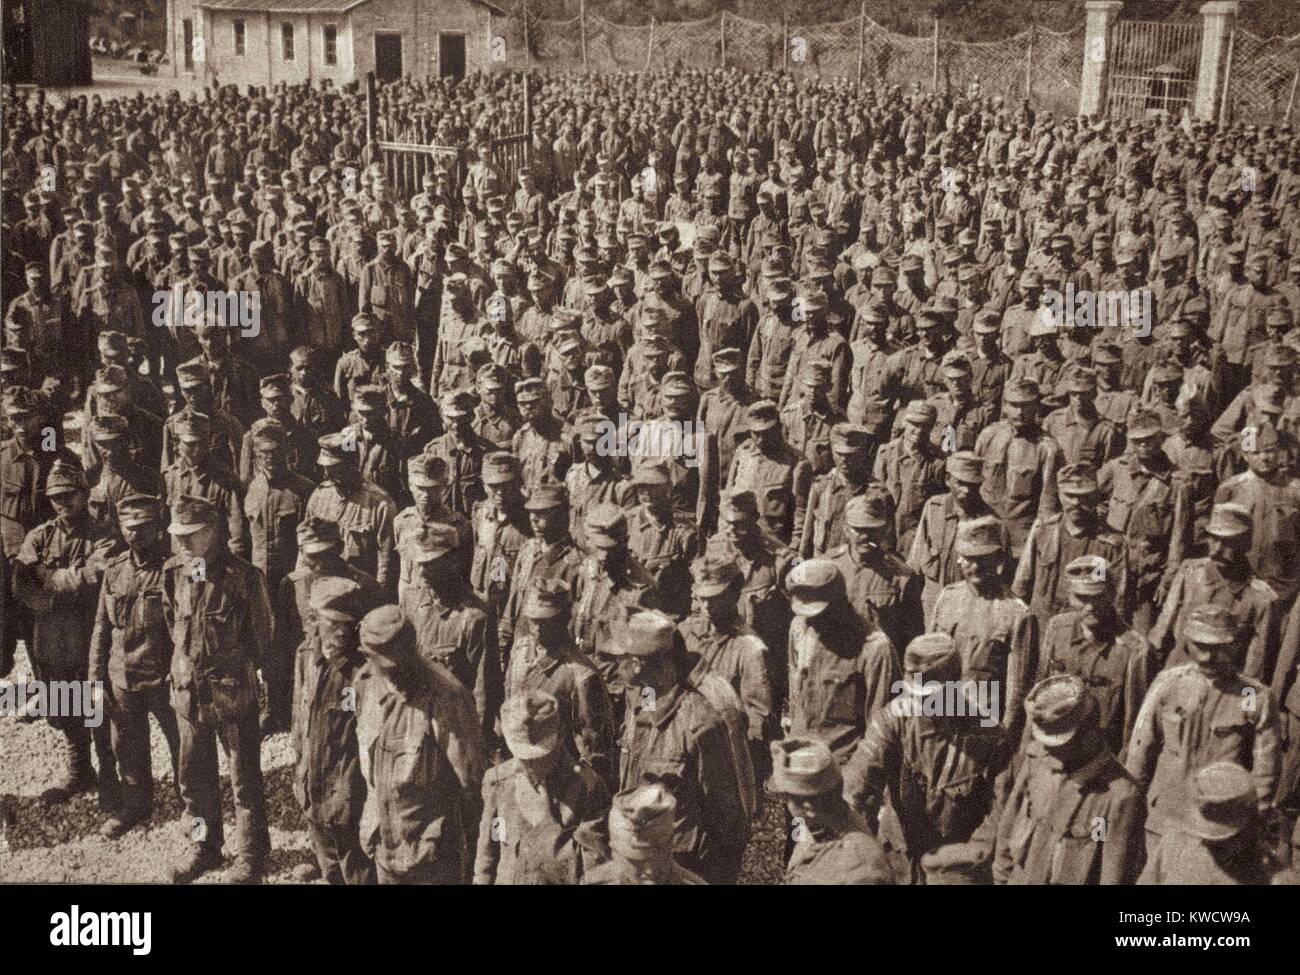 World War 1 on the Italian-Austrian front. Austrian prisoners taken when the Italian Army conquered Gorizia during the Sixth Battle of the Isonzo in August 1916. (BSLOC 2013 1 29) Stock Photo